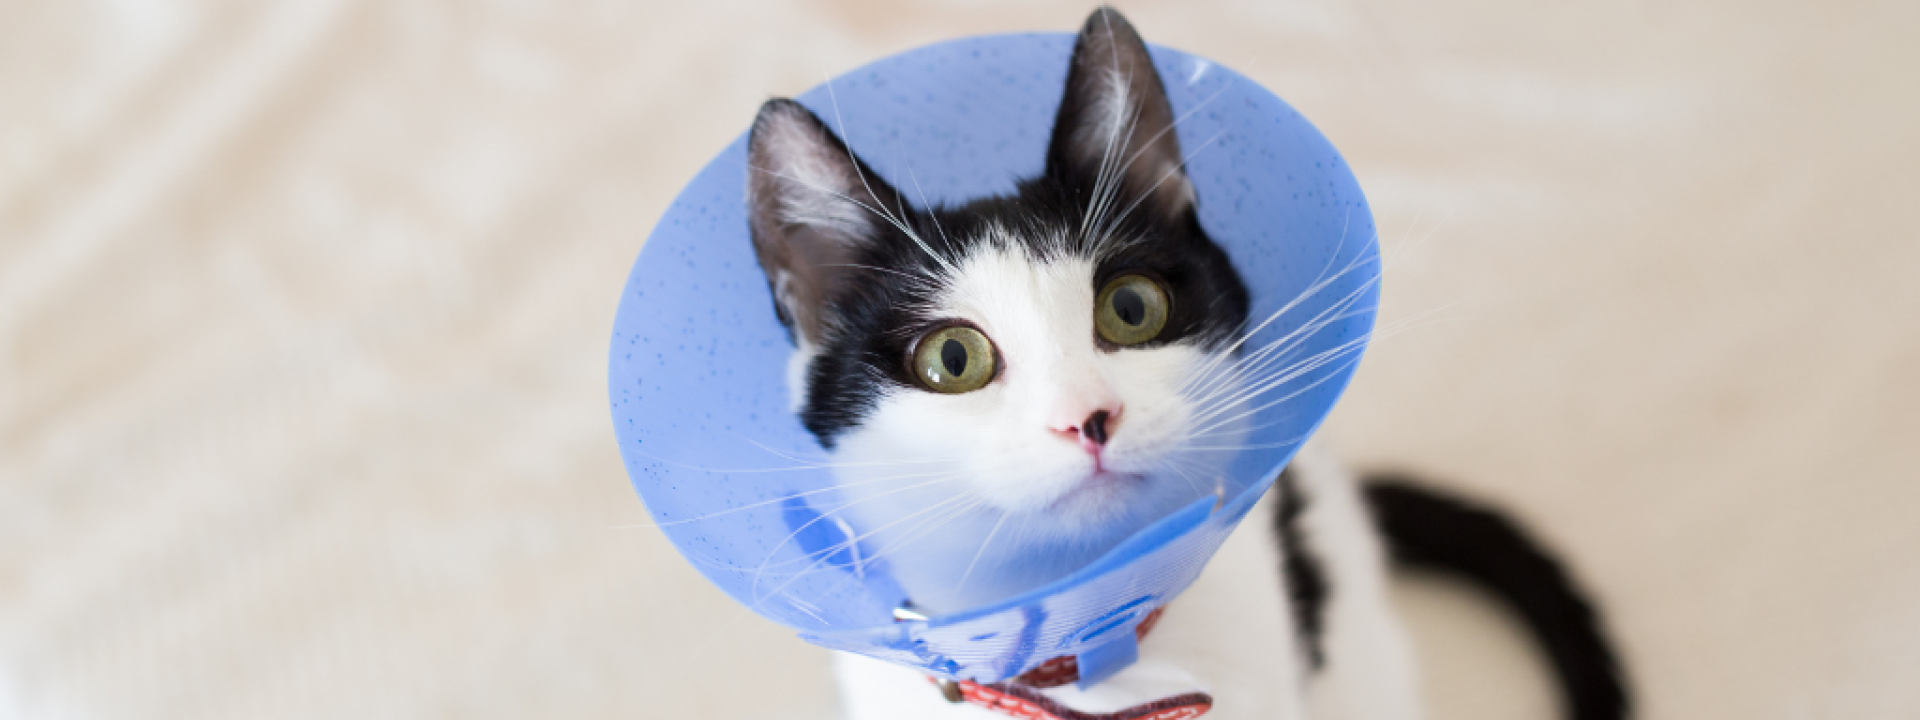 Black and white cat in cone.